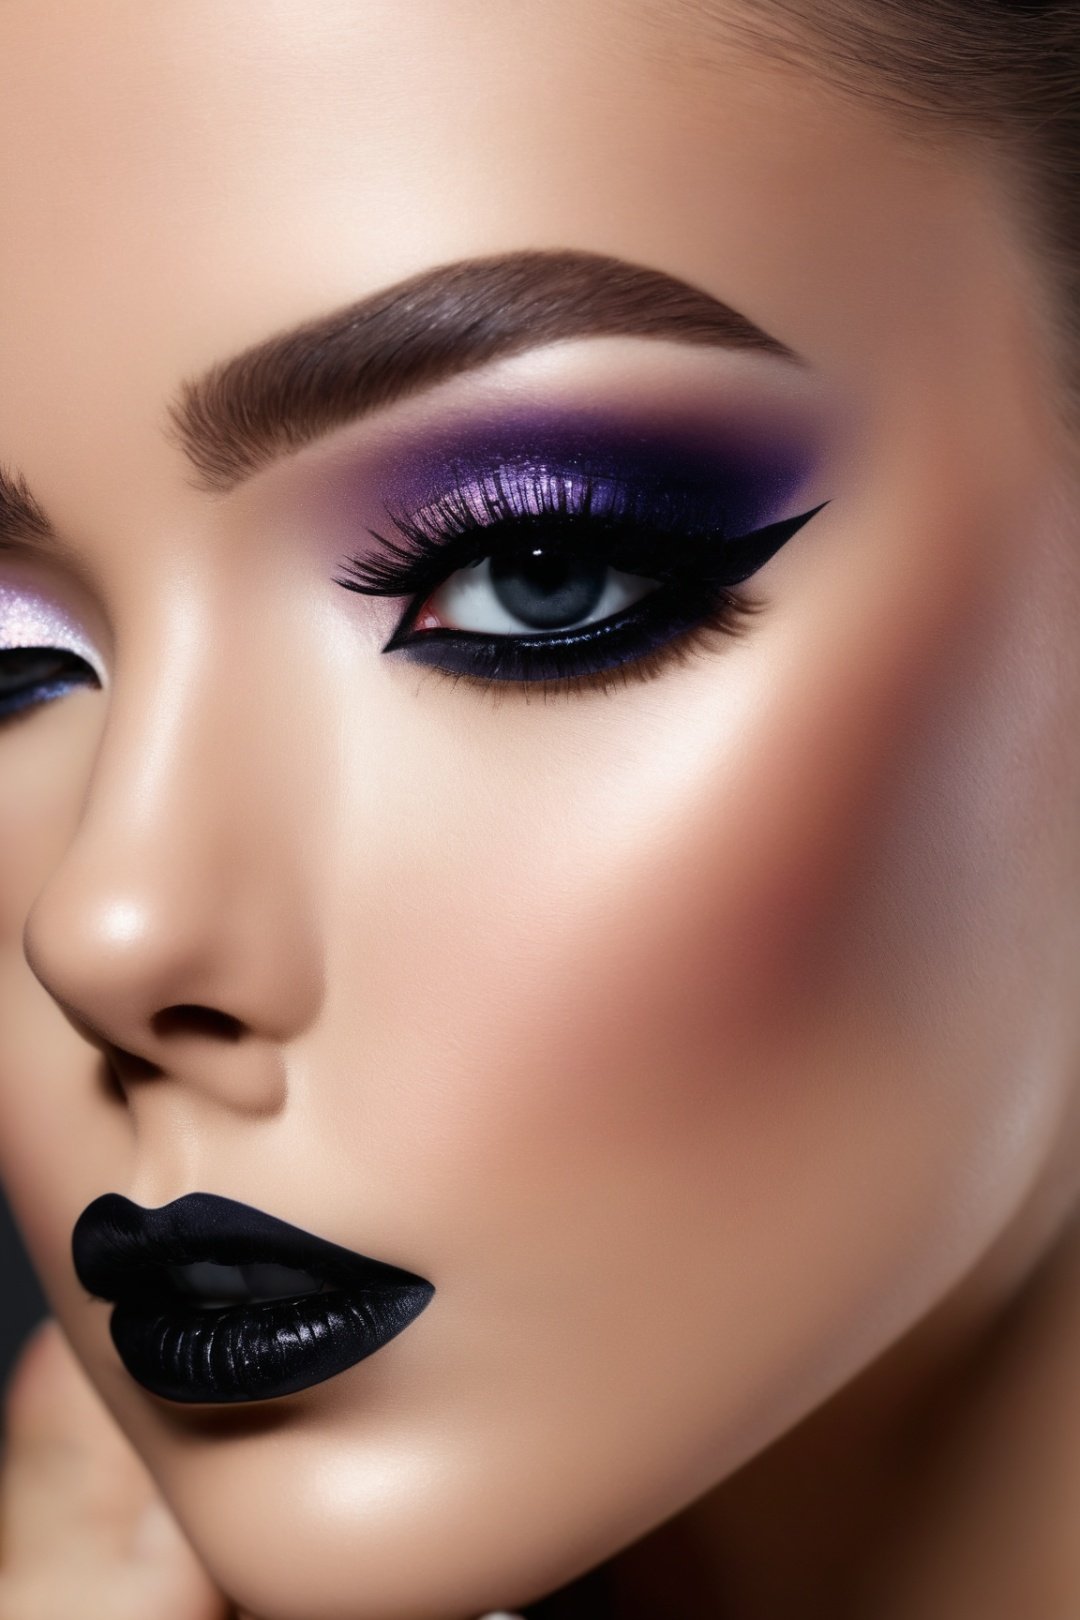 beautiful woman, makeup, detailed eyes, close-up of black lipstick, portrait, photorealistic, 8k, high-resolution, ultra-detailed, professional lighting, perfect skin, stunning features, intense gaze, intricate eyelashes, flawless complexion, vibrant colors, dramatic shadows, glossy finish